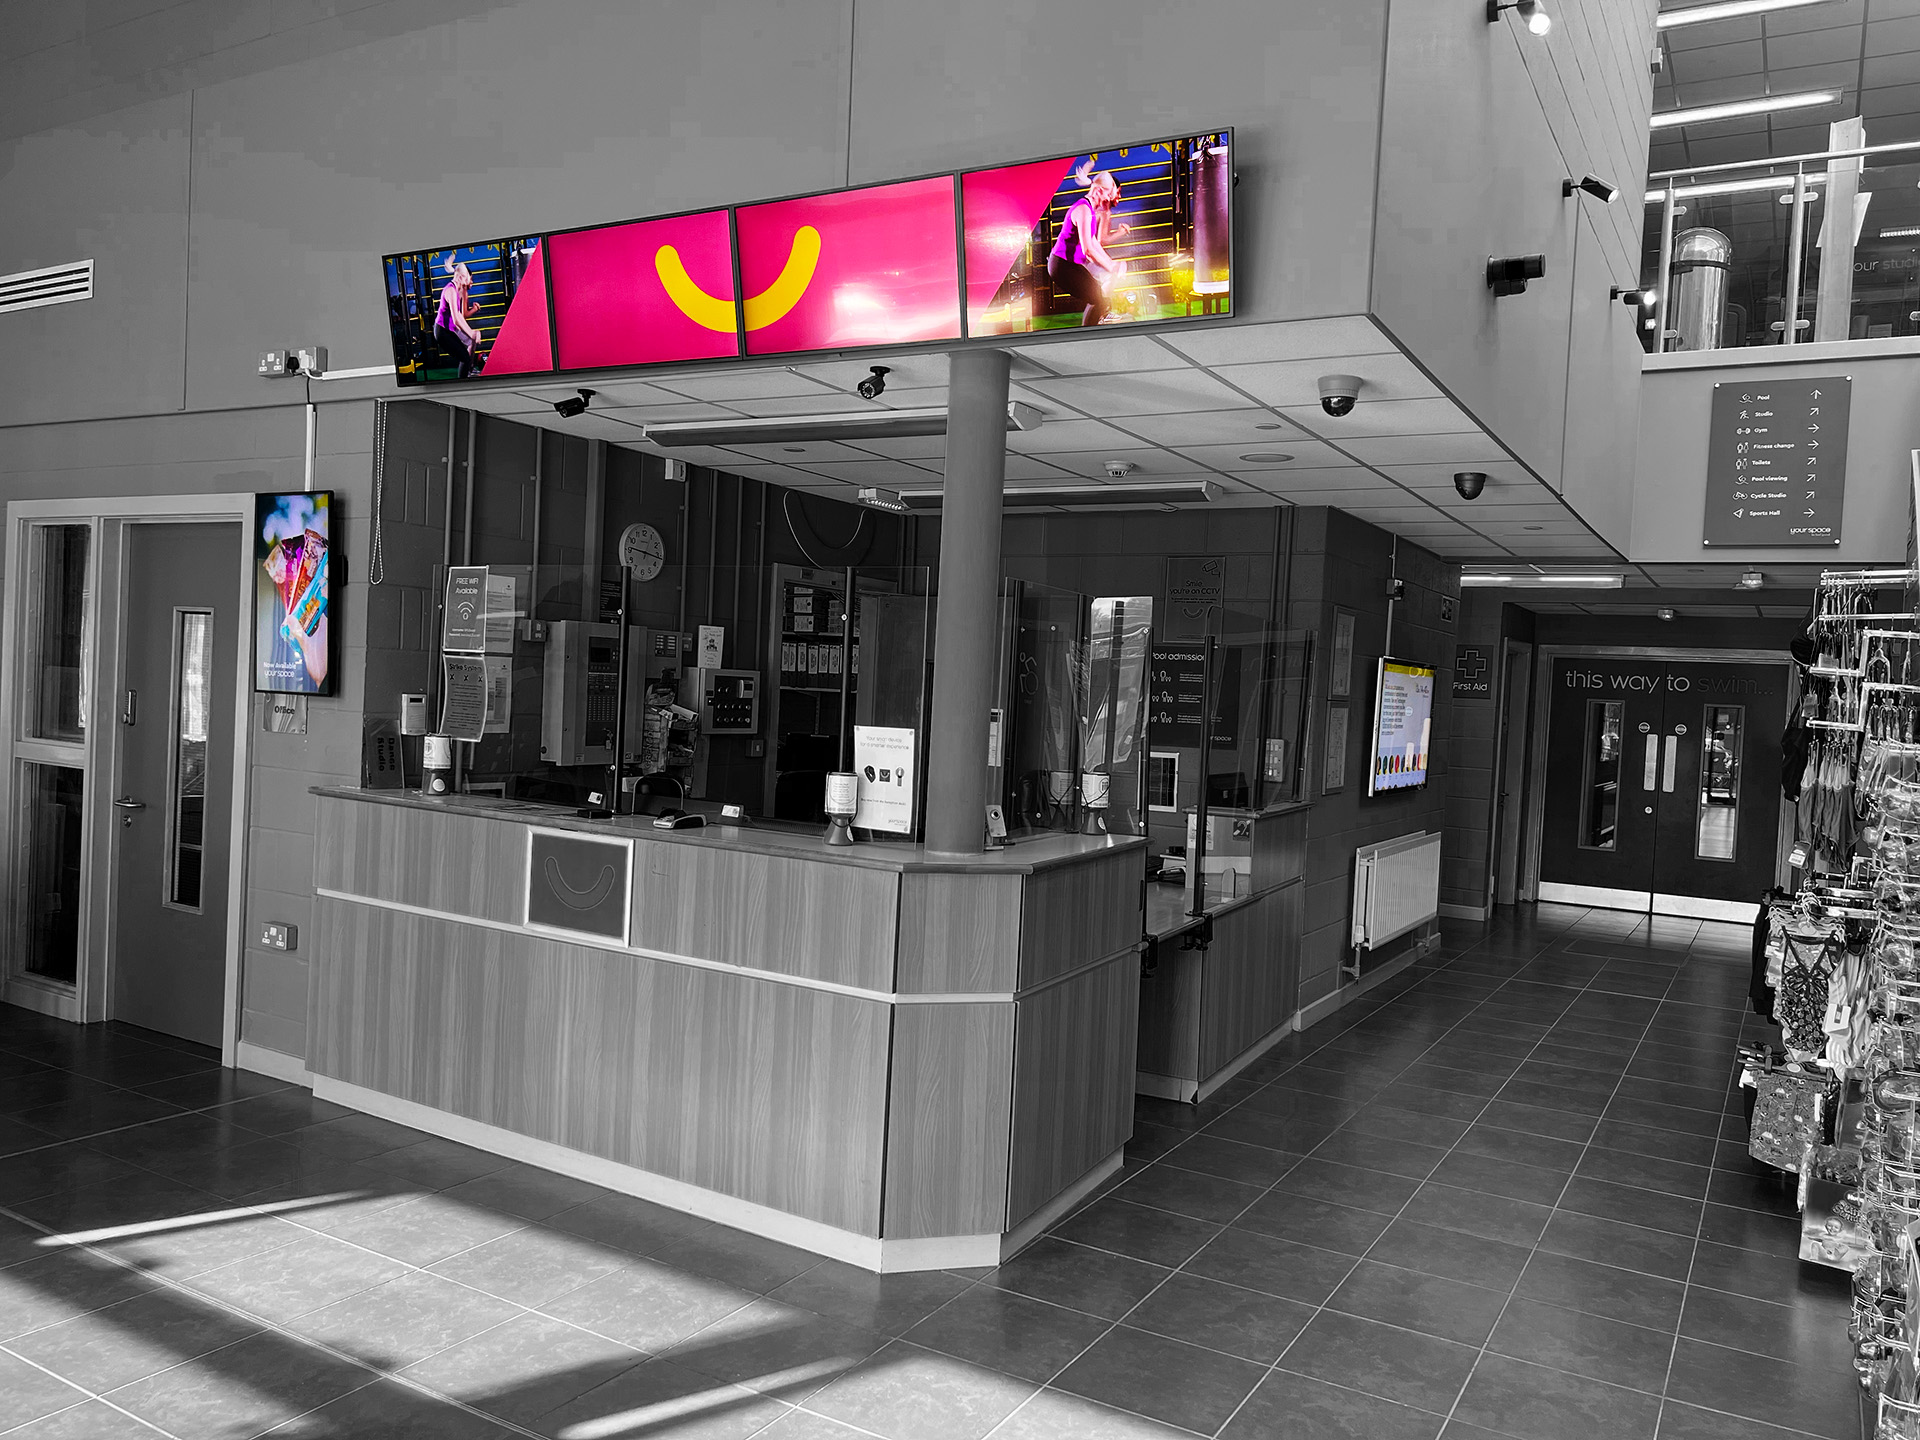 embed signage digital signage software - barnsley premier leisure BPL - 4x1 video wall and portrait screen gym fitness leisure digital signage